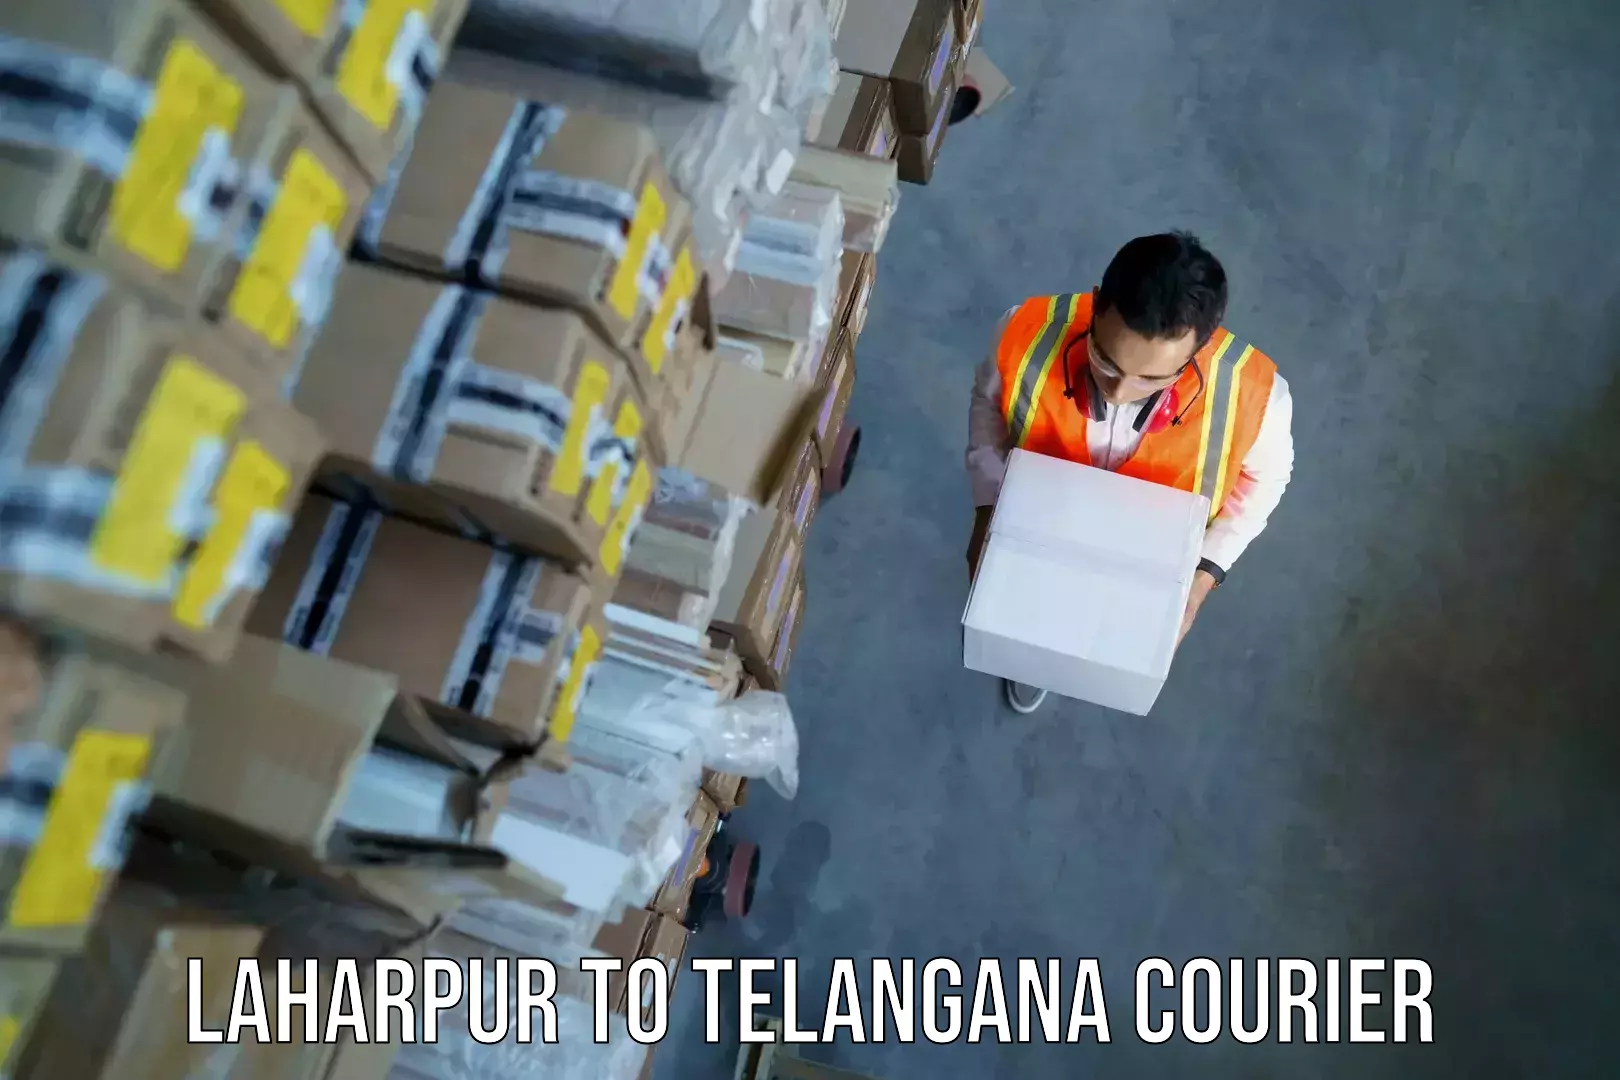 Luggage transport consultancy in Laharpur to Gollapalli